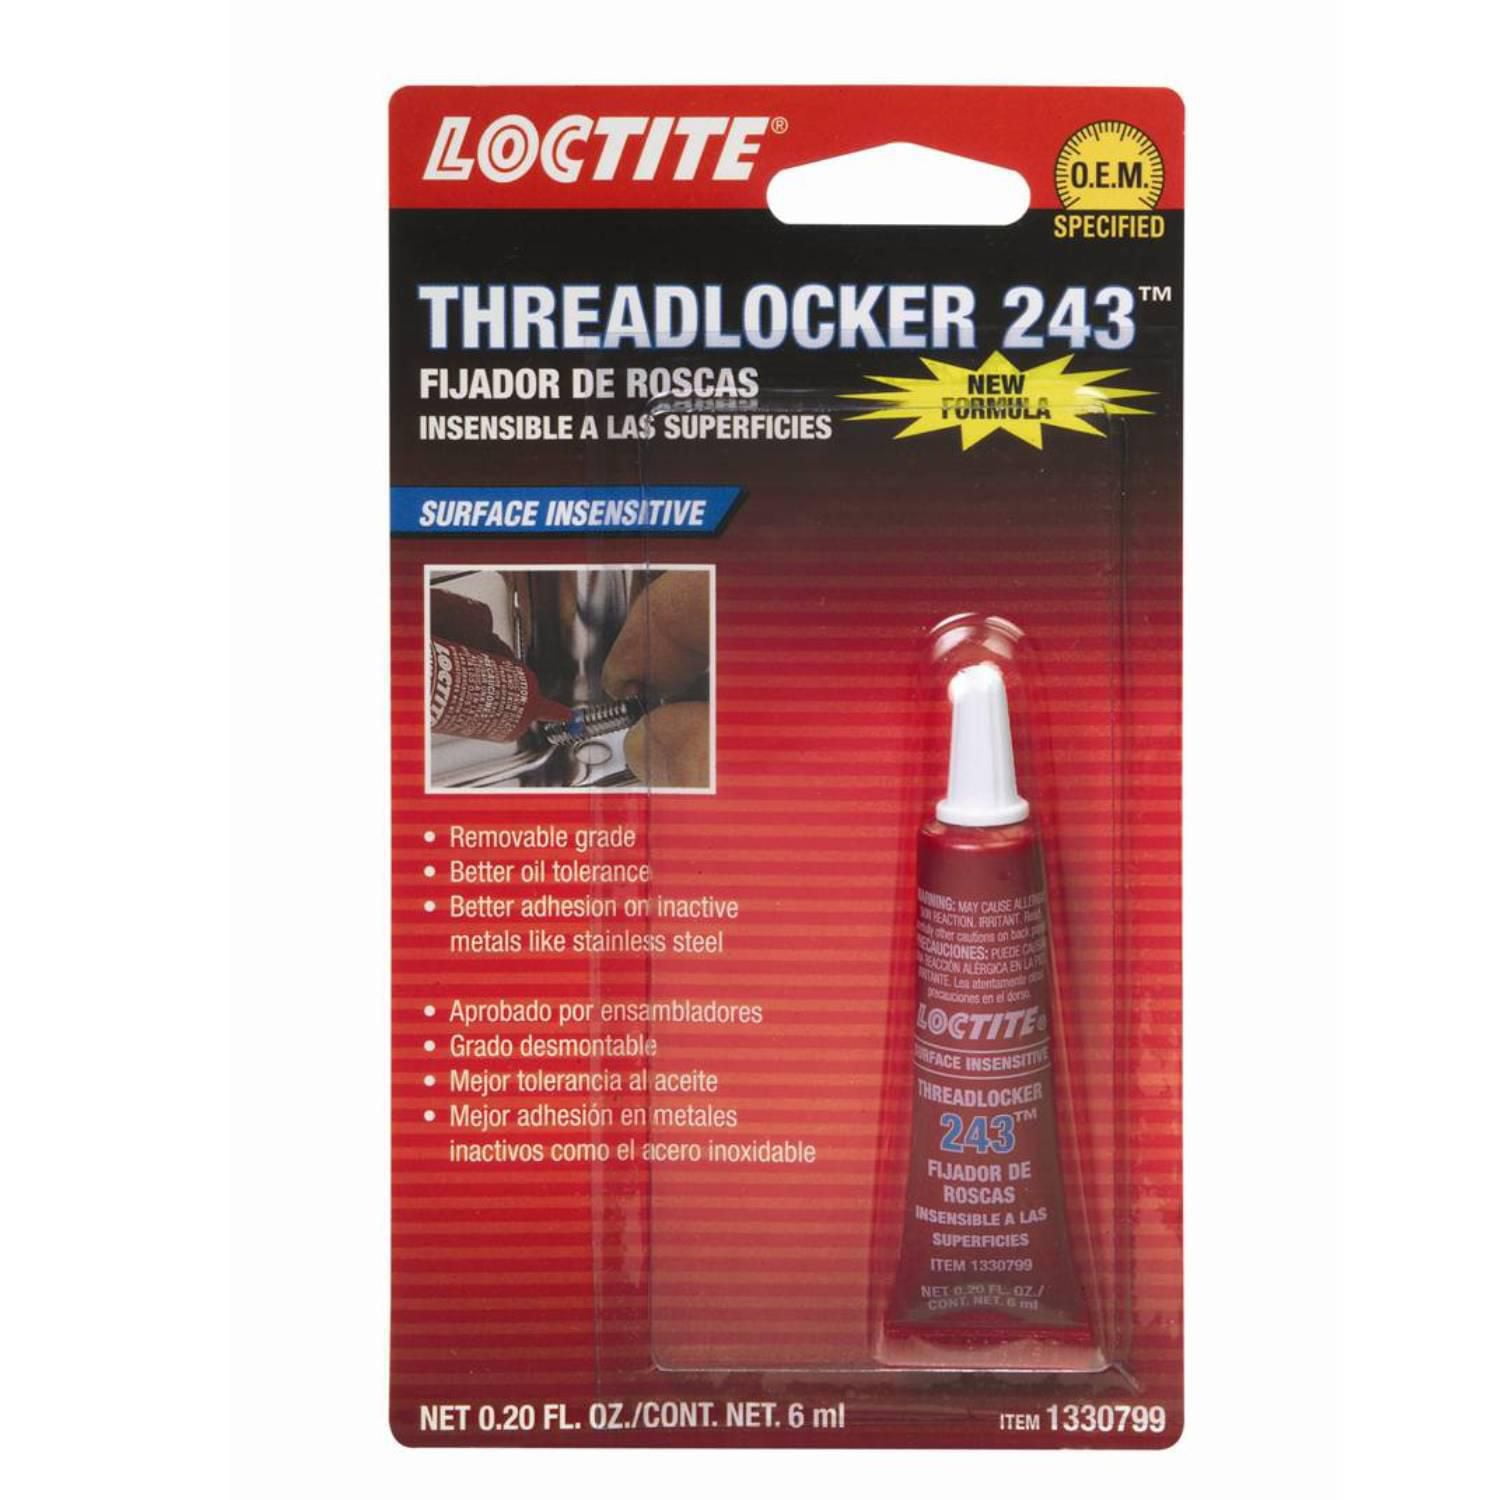 LOCTITE 243 or EVERBUILD GP Blue Thread Lock to Secure Screw in Watch – MWC  - Military Watch Company